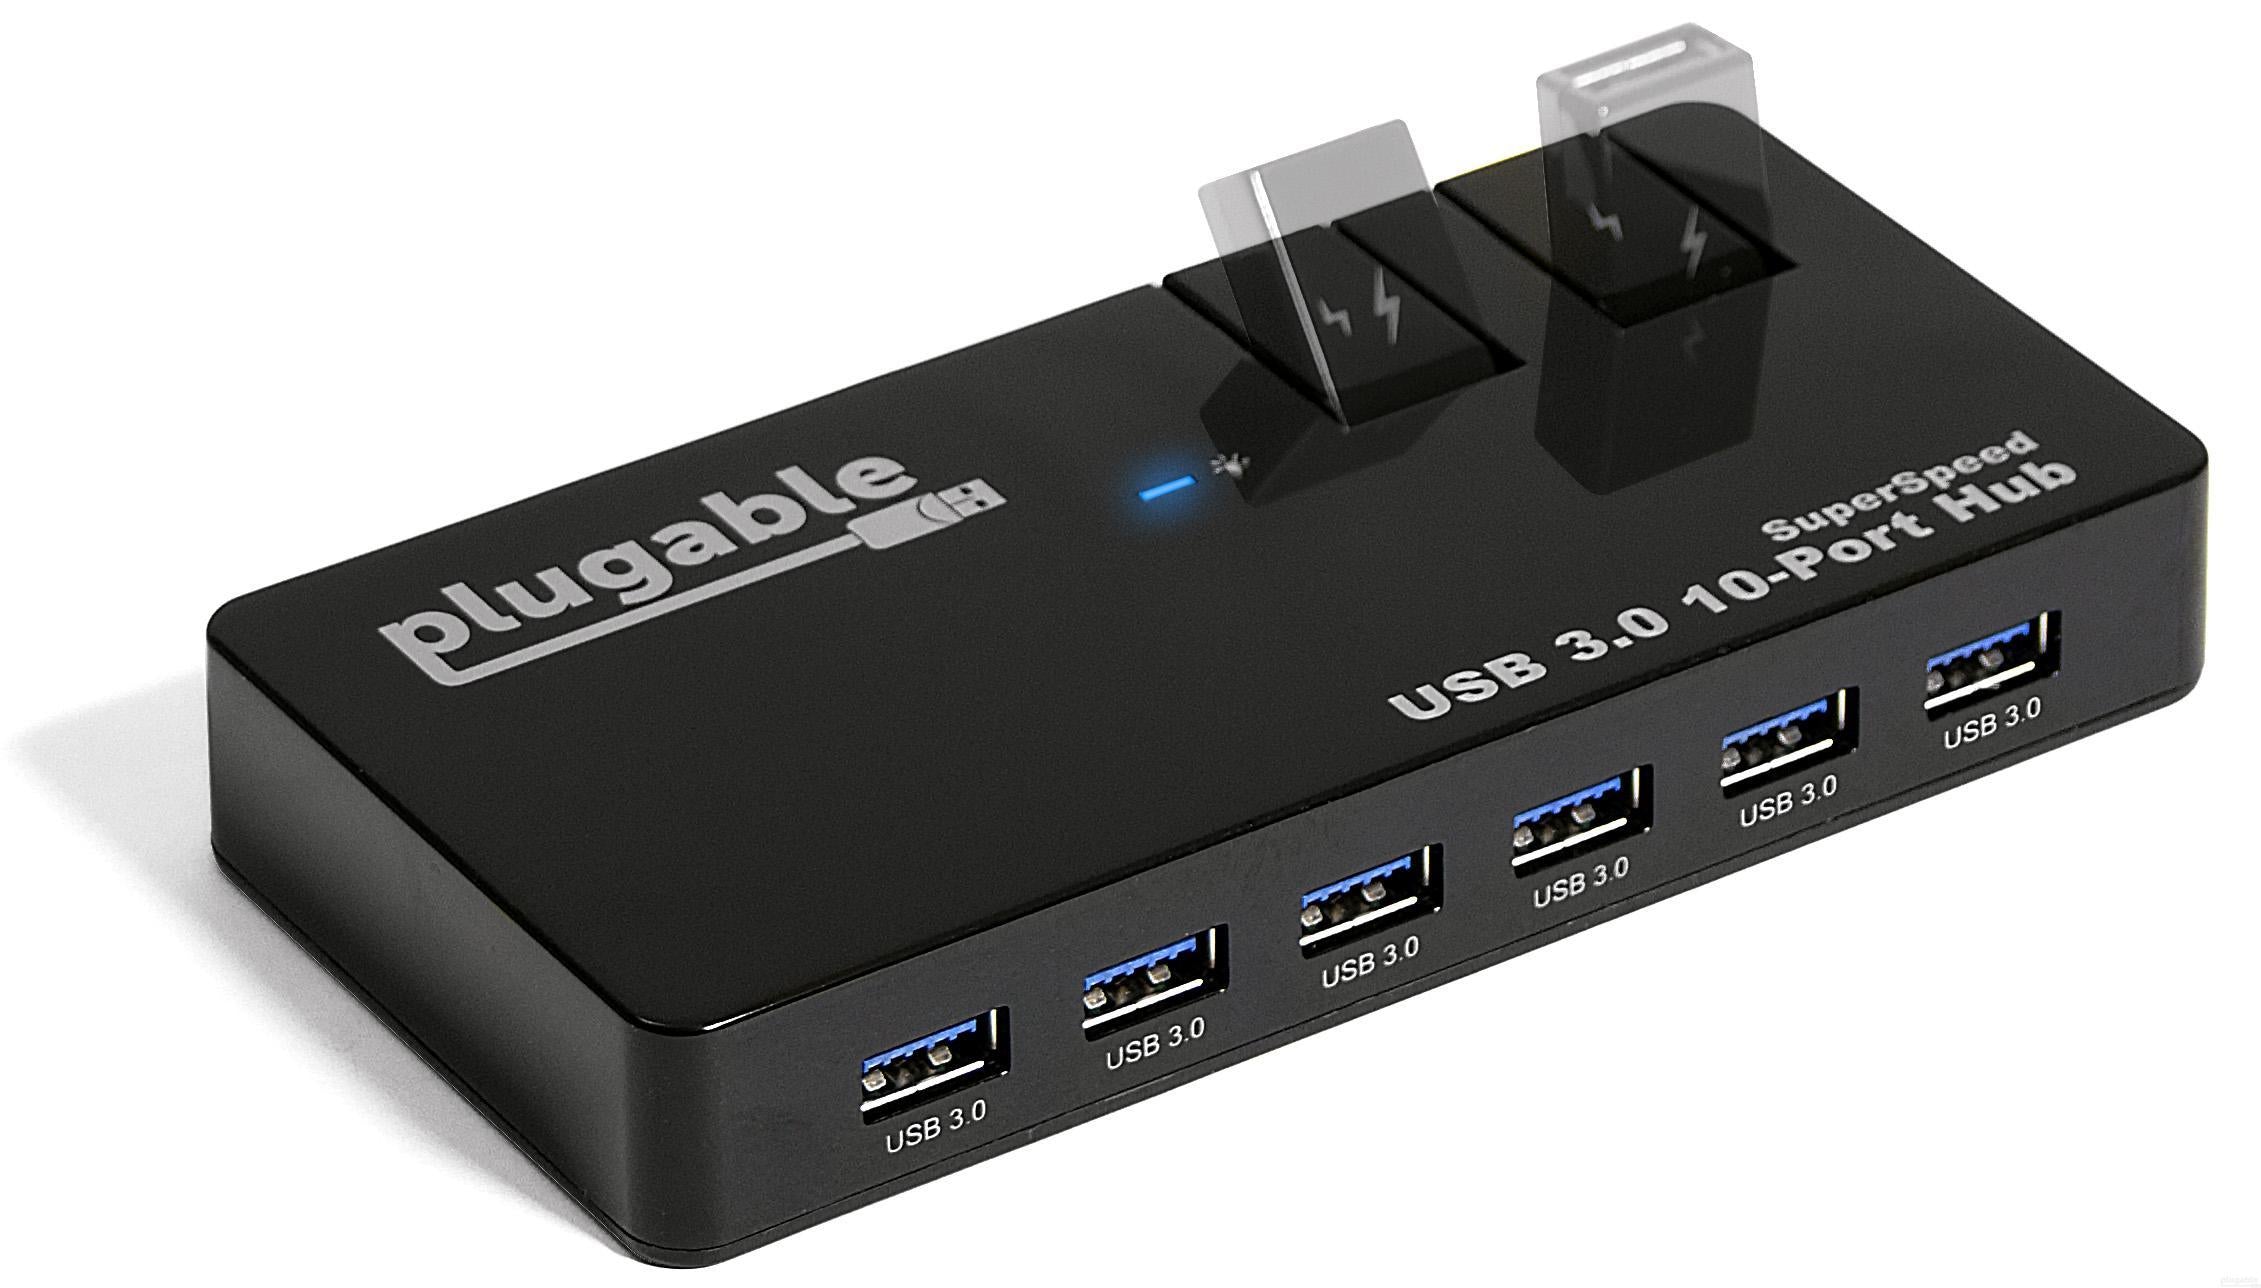 Plugable USB 3.0 10-Port Hub with 50W Power Adapter